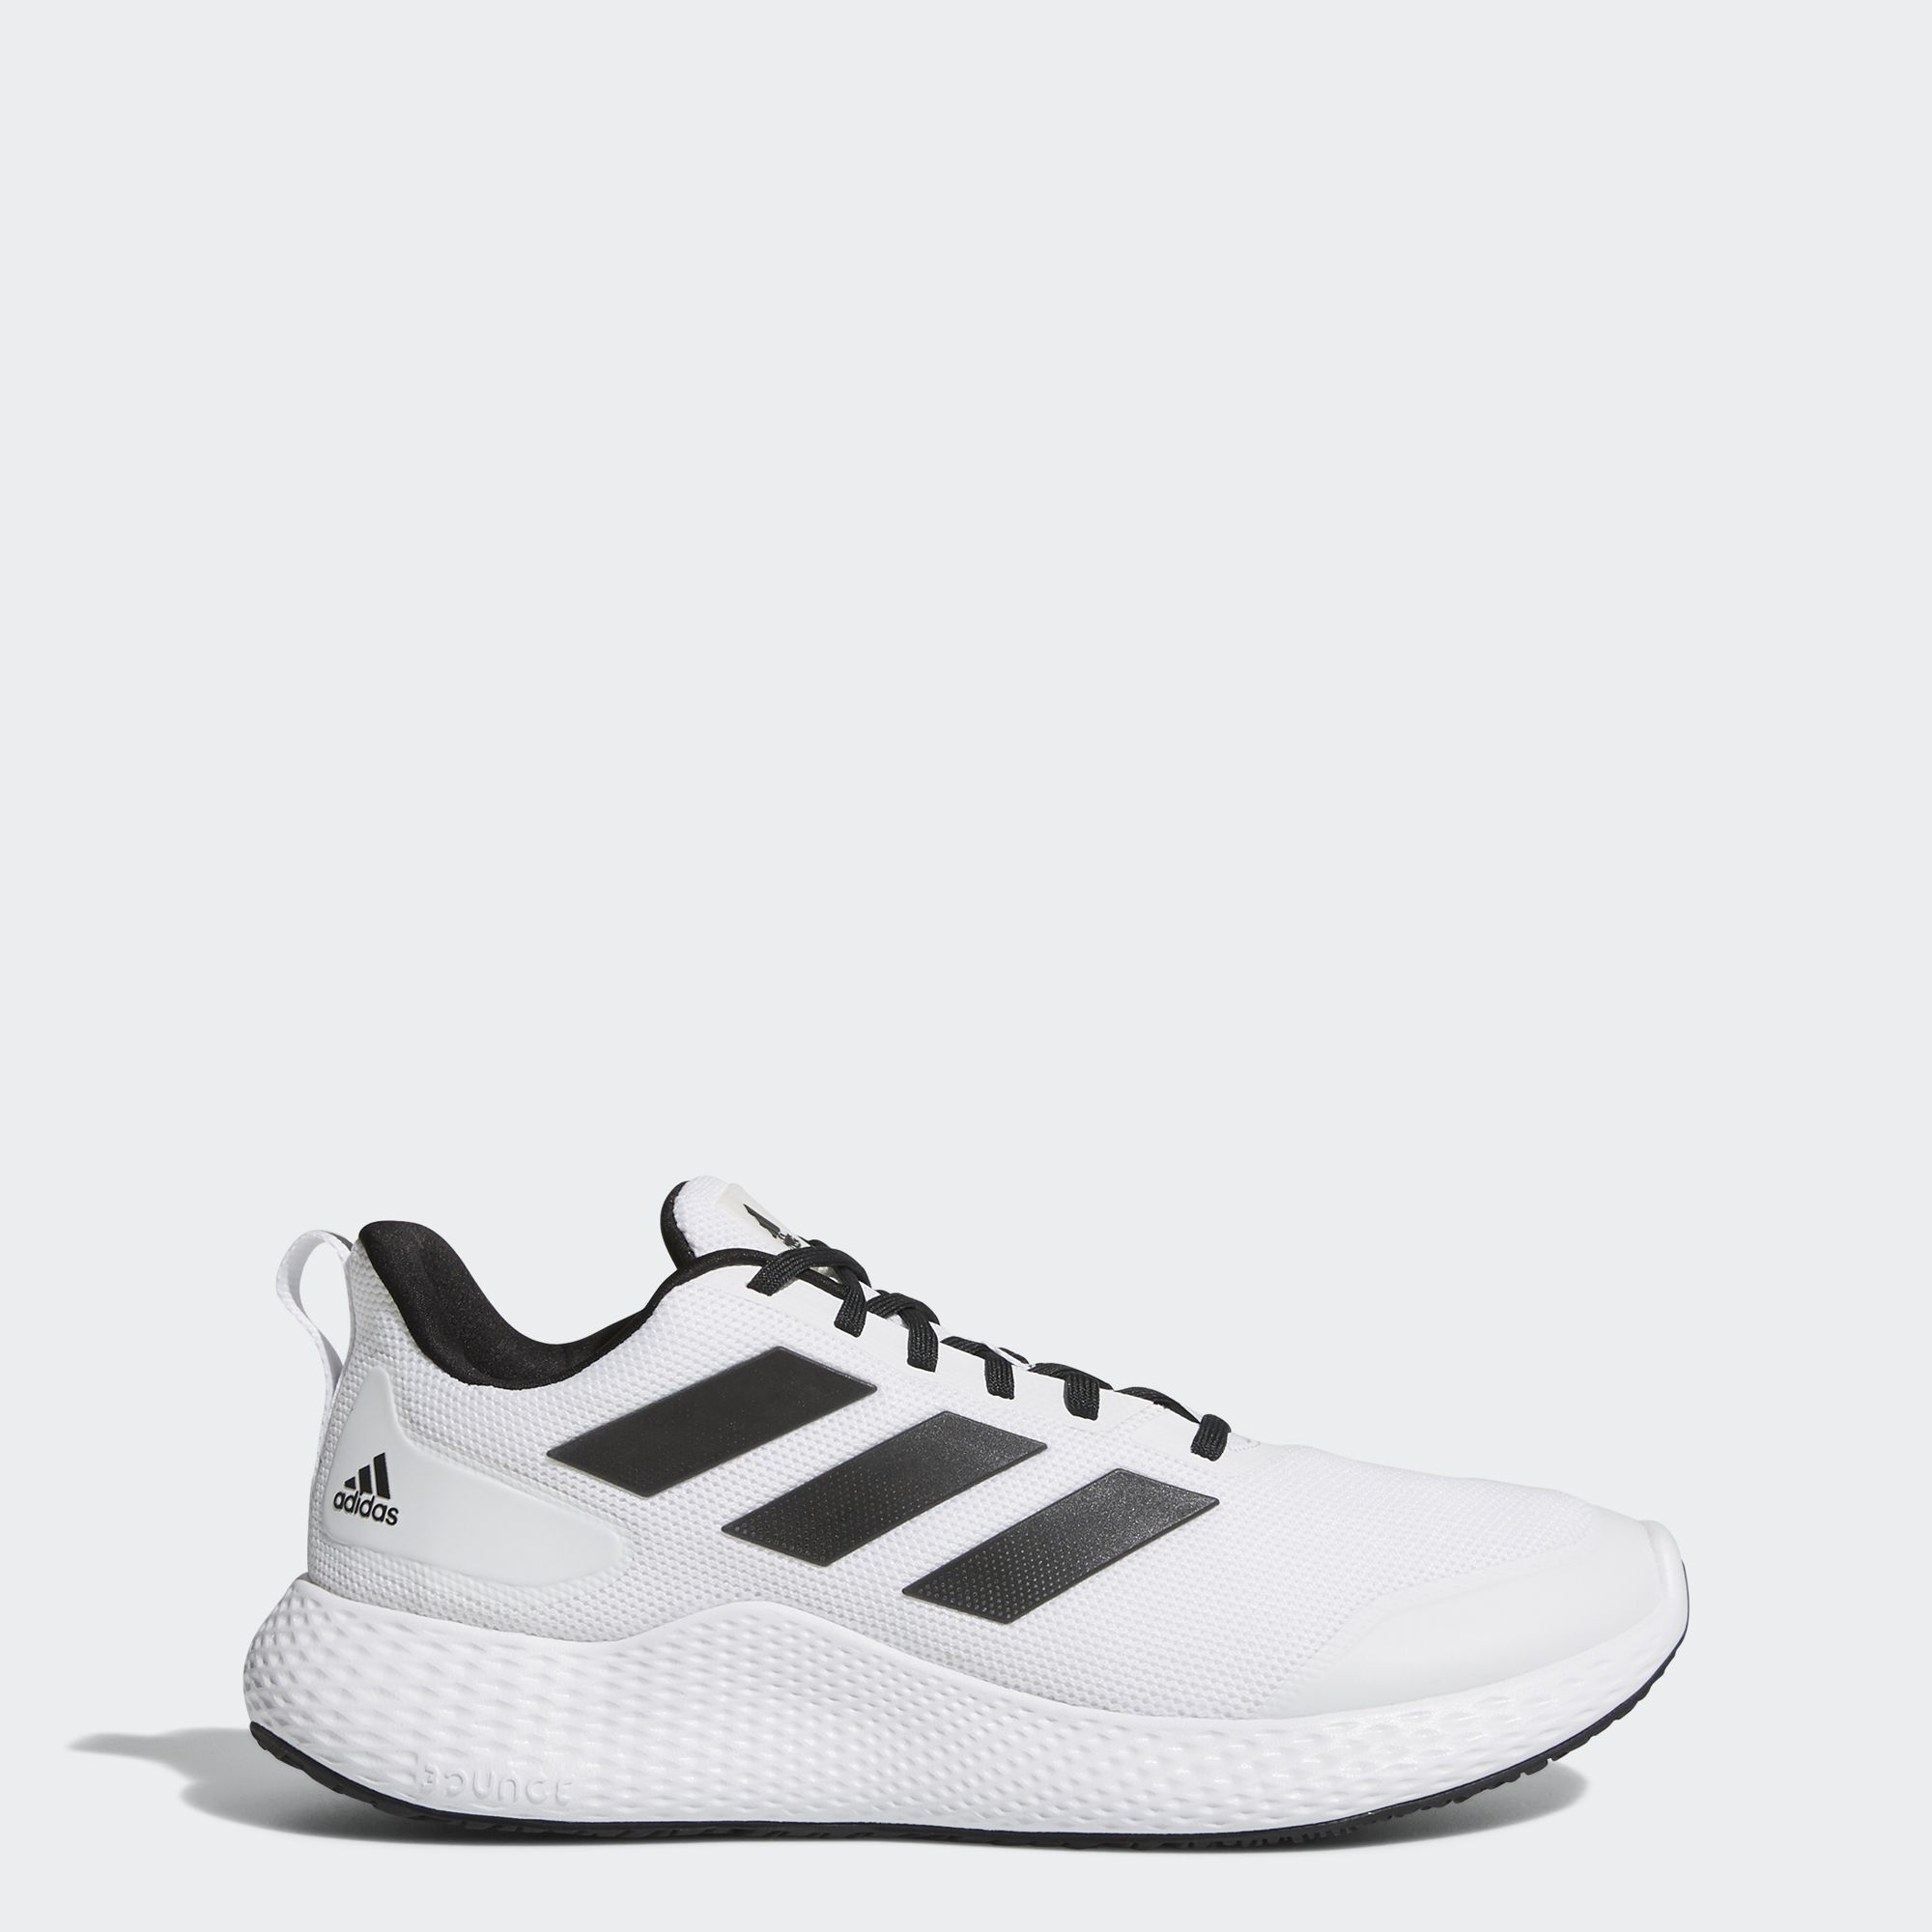 adidas shoes men black and white